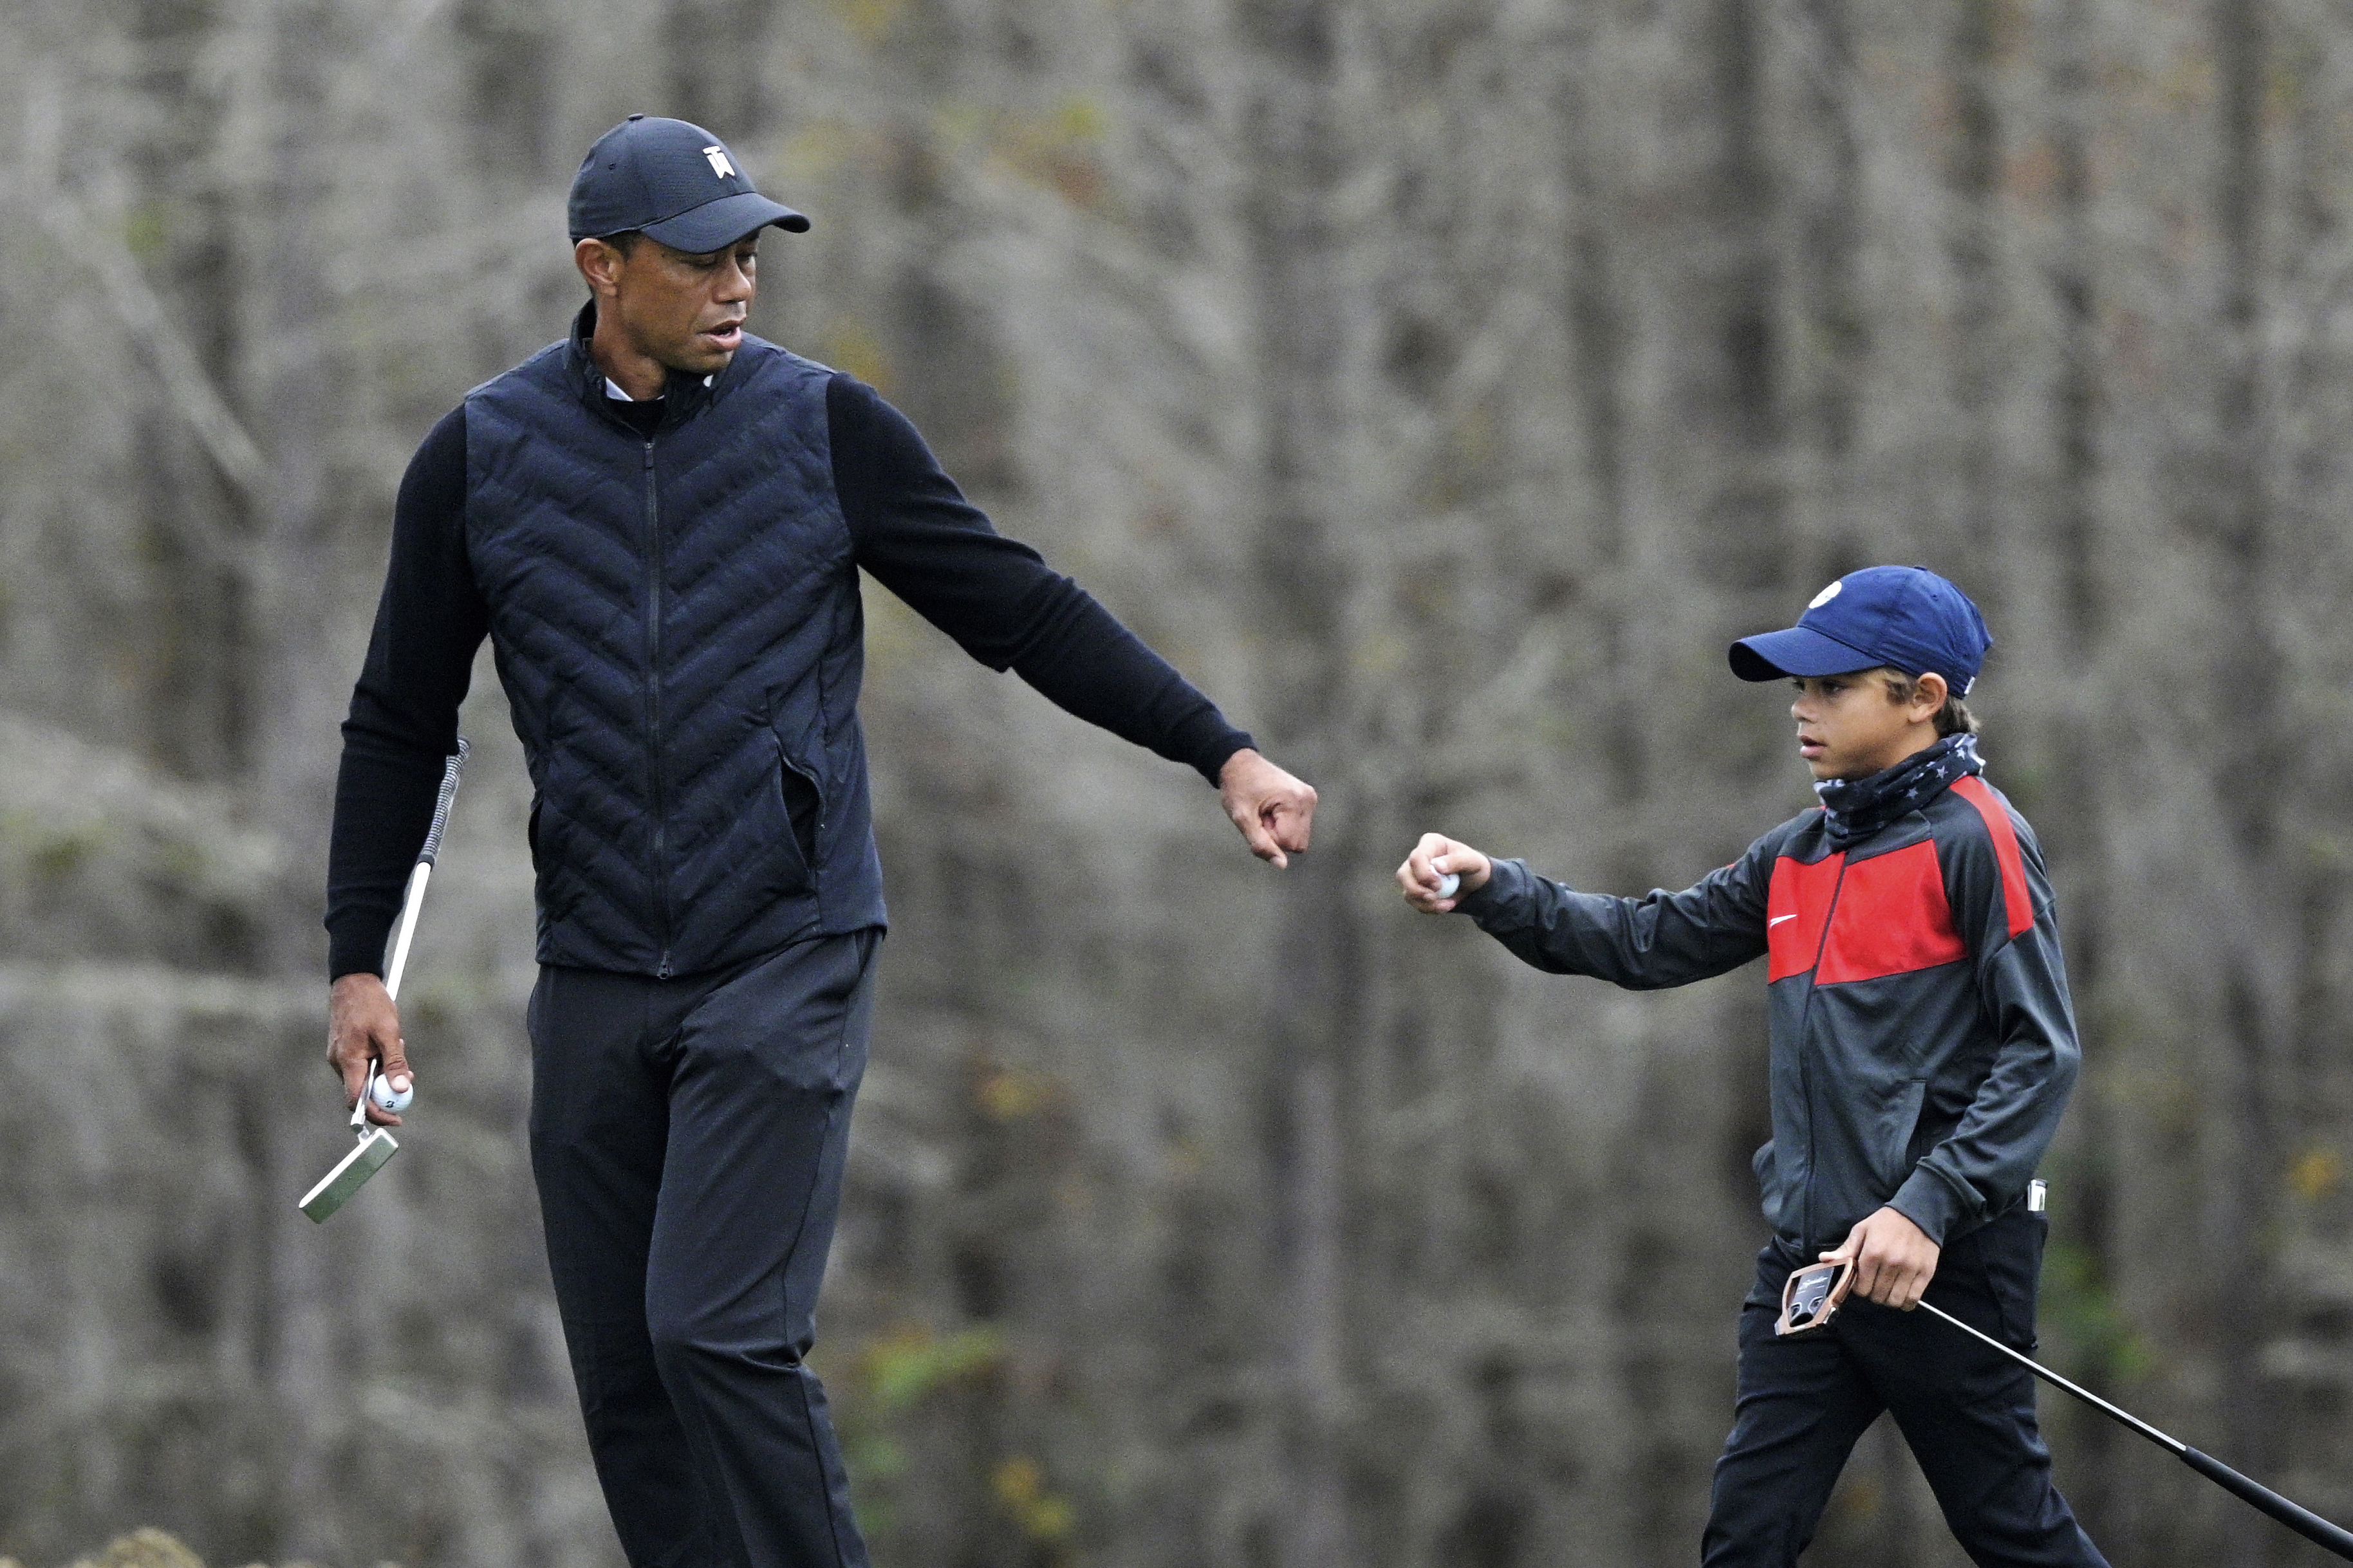 Tiger Woods will return to golf competition in the PNC father-son event Dec